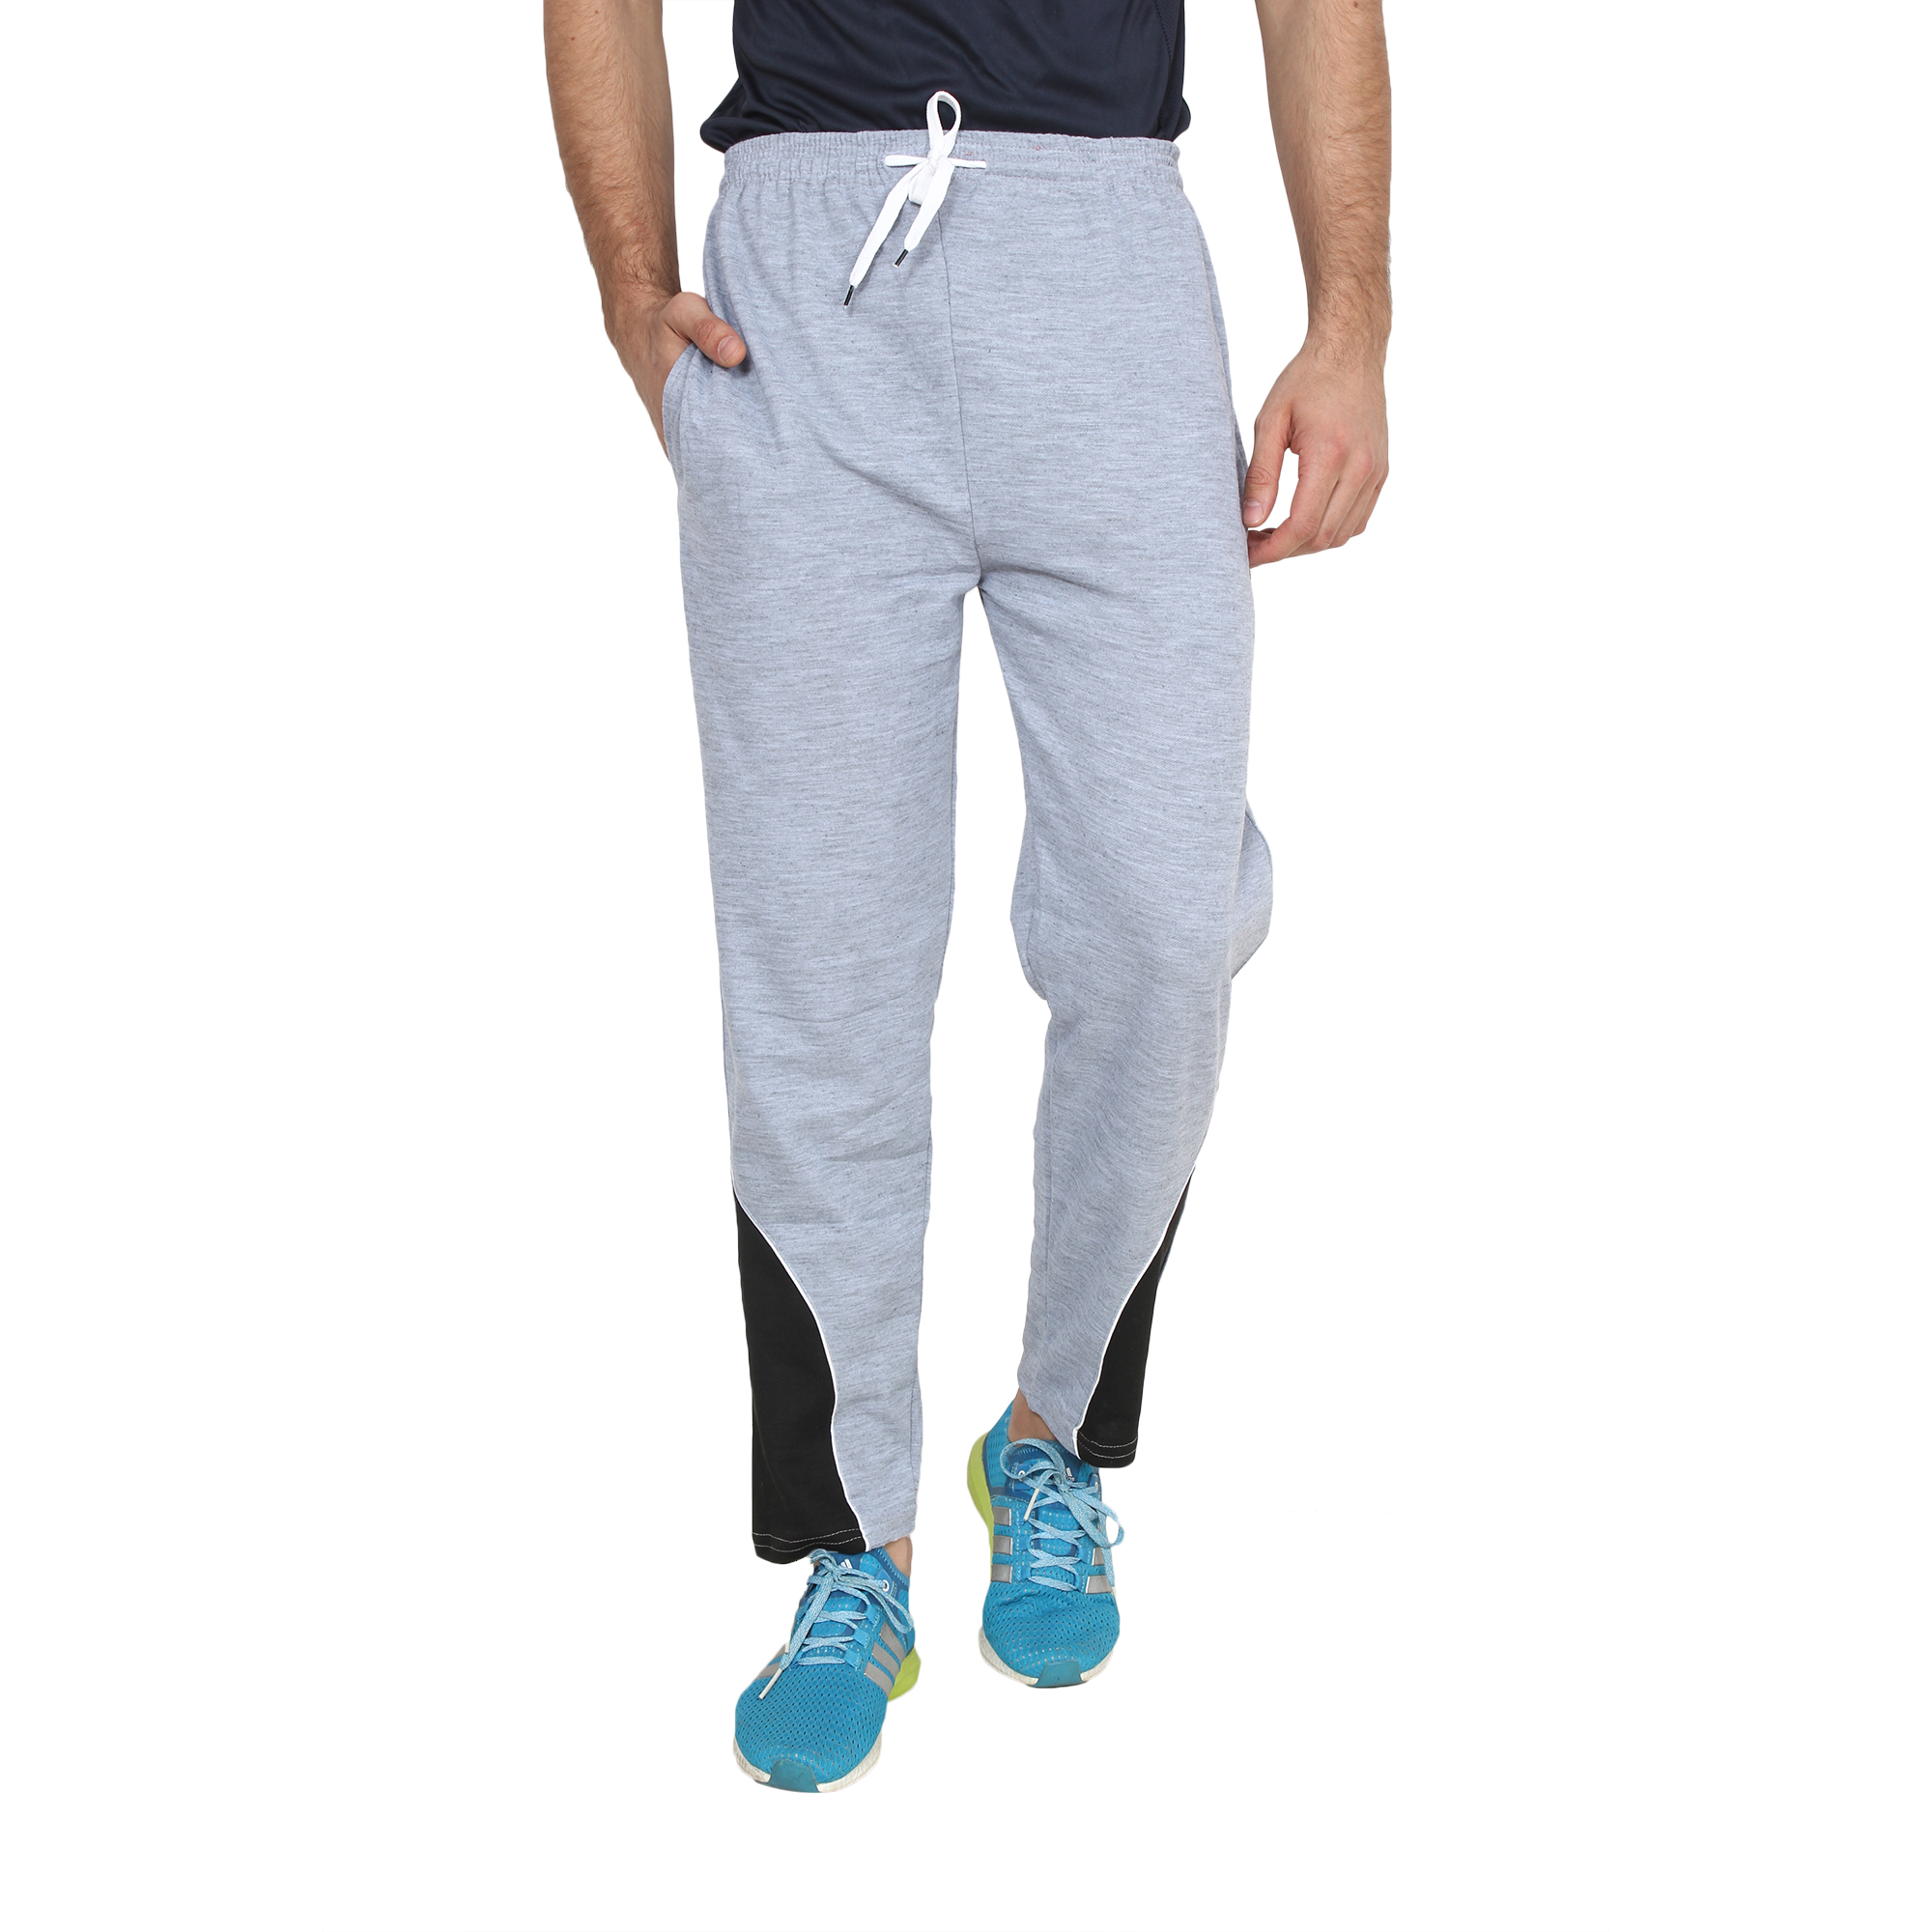 Buy Swaggy Solid Men's Grey Track Pants Online @ ₹499 from ShopClues